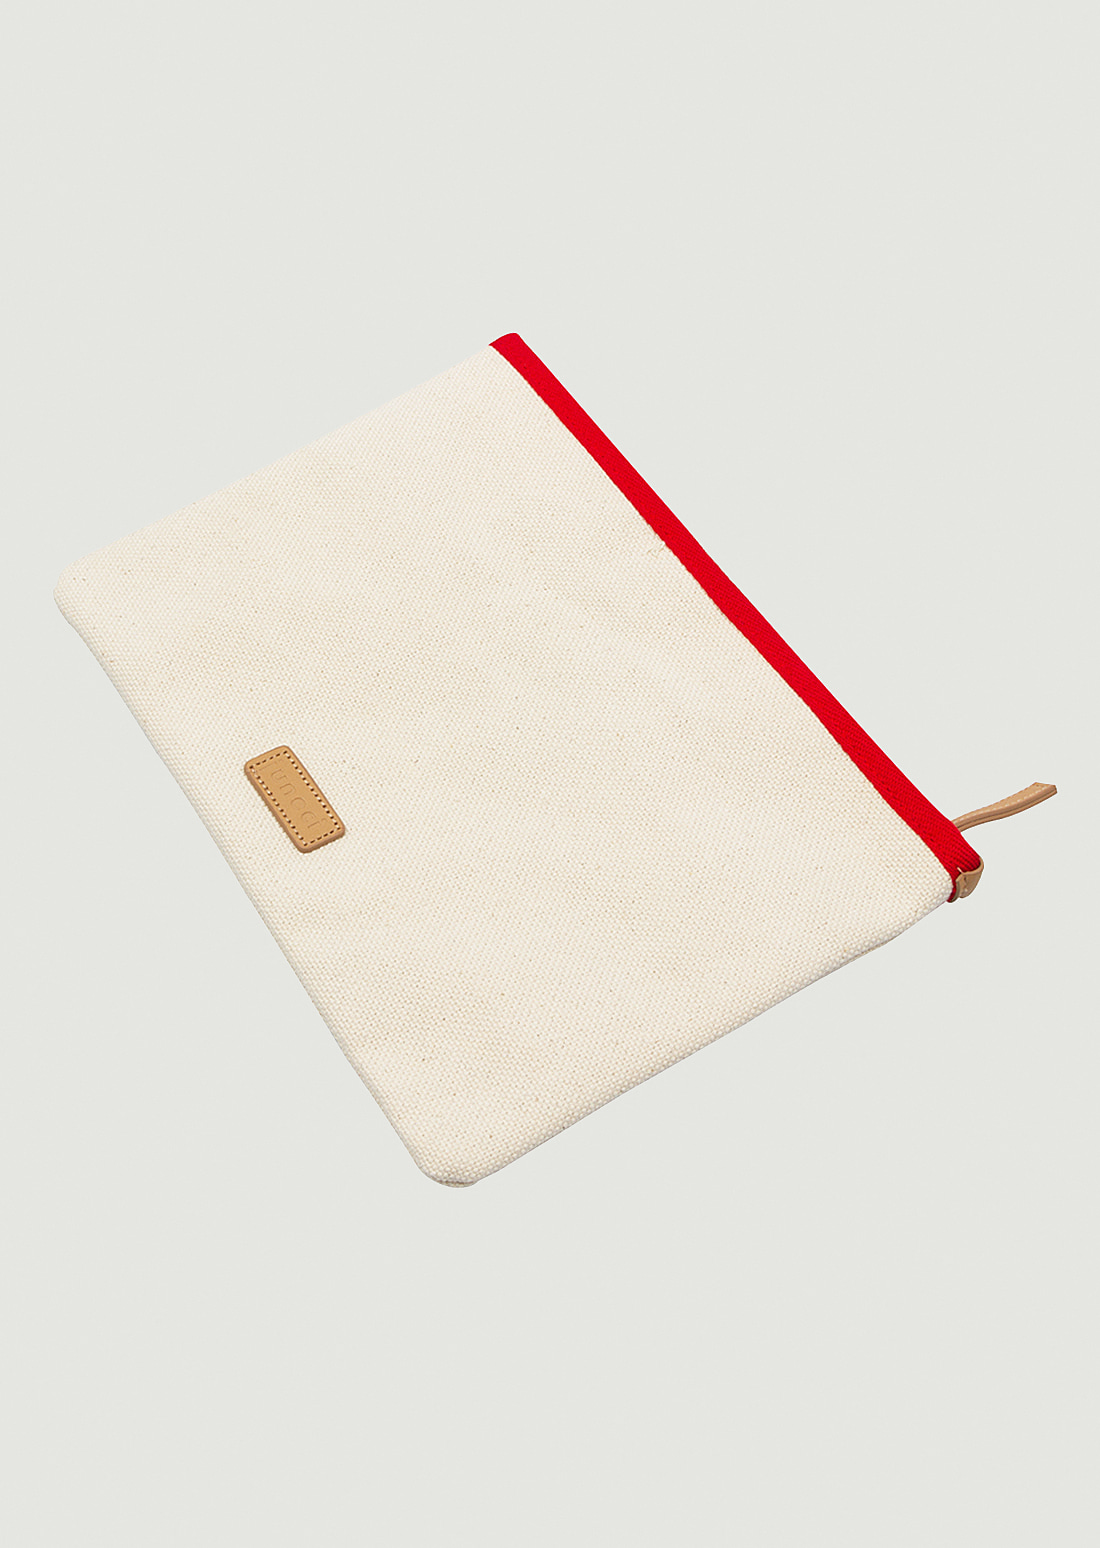 ‘A masked girl’ Canvas Clutch (Natural+Red)